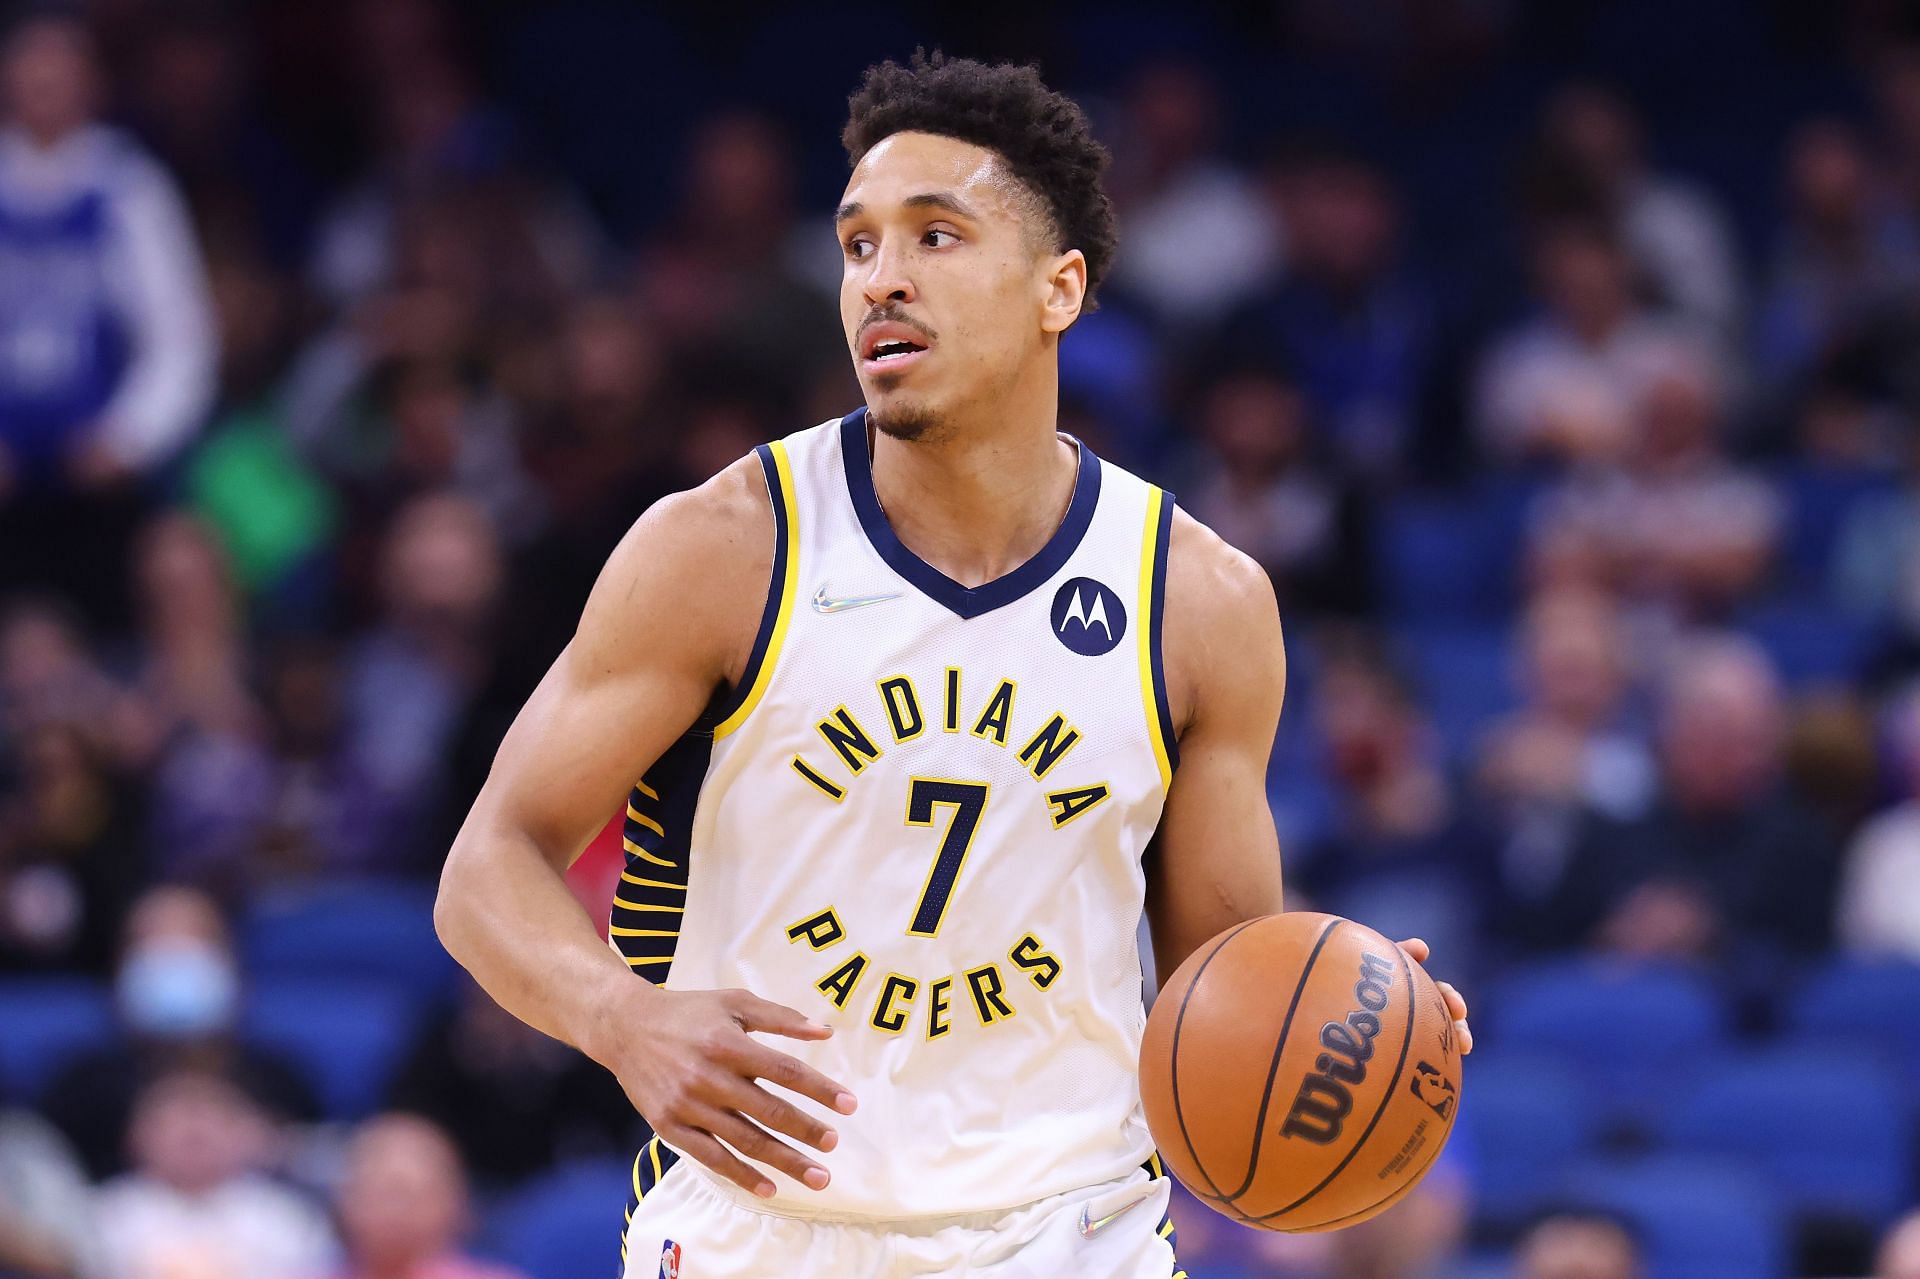 Malcolm Brogdon was traded by the Indiana Pacers.